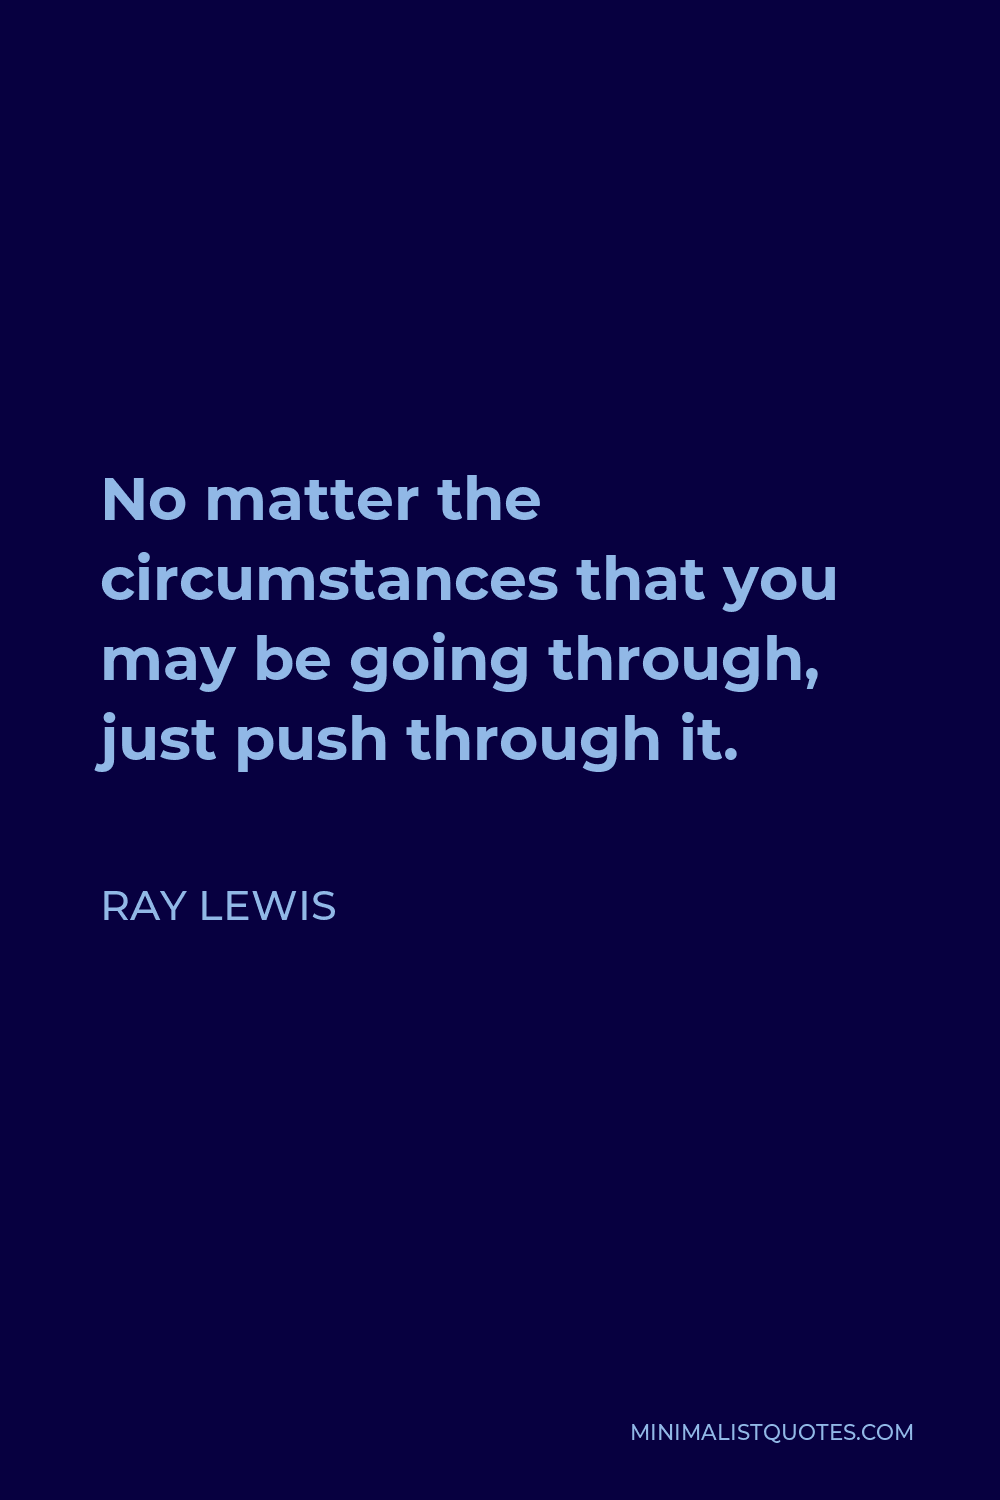 Ray Lewis Quote - No matter the circumstances that you may be going through, just push through it.